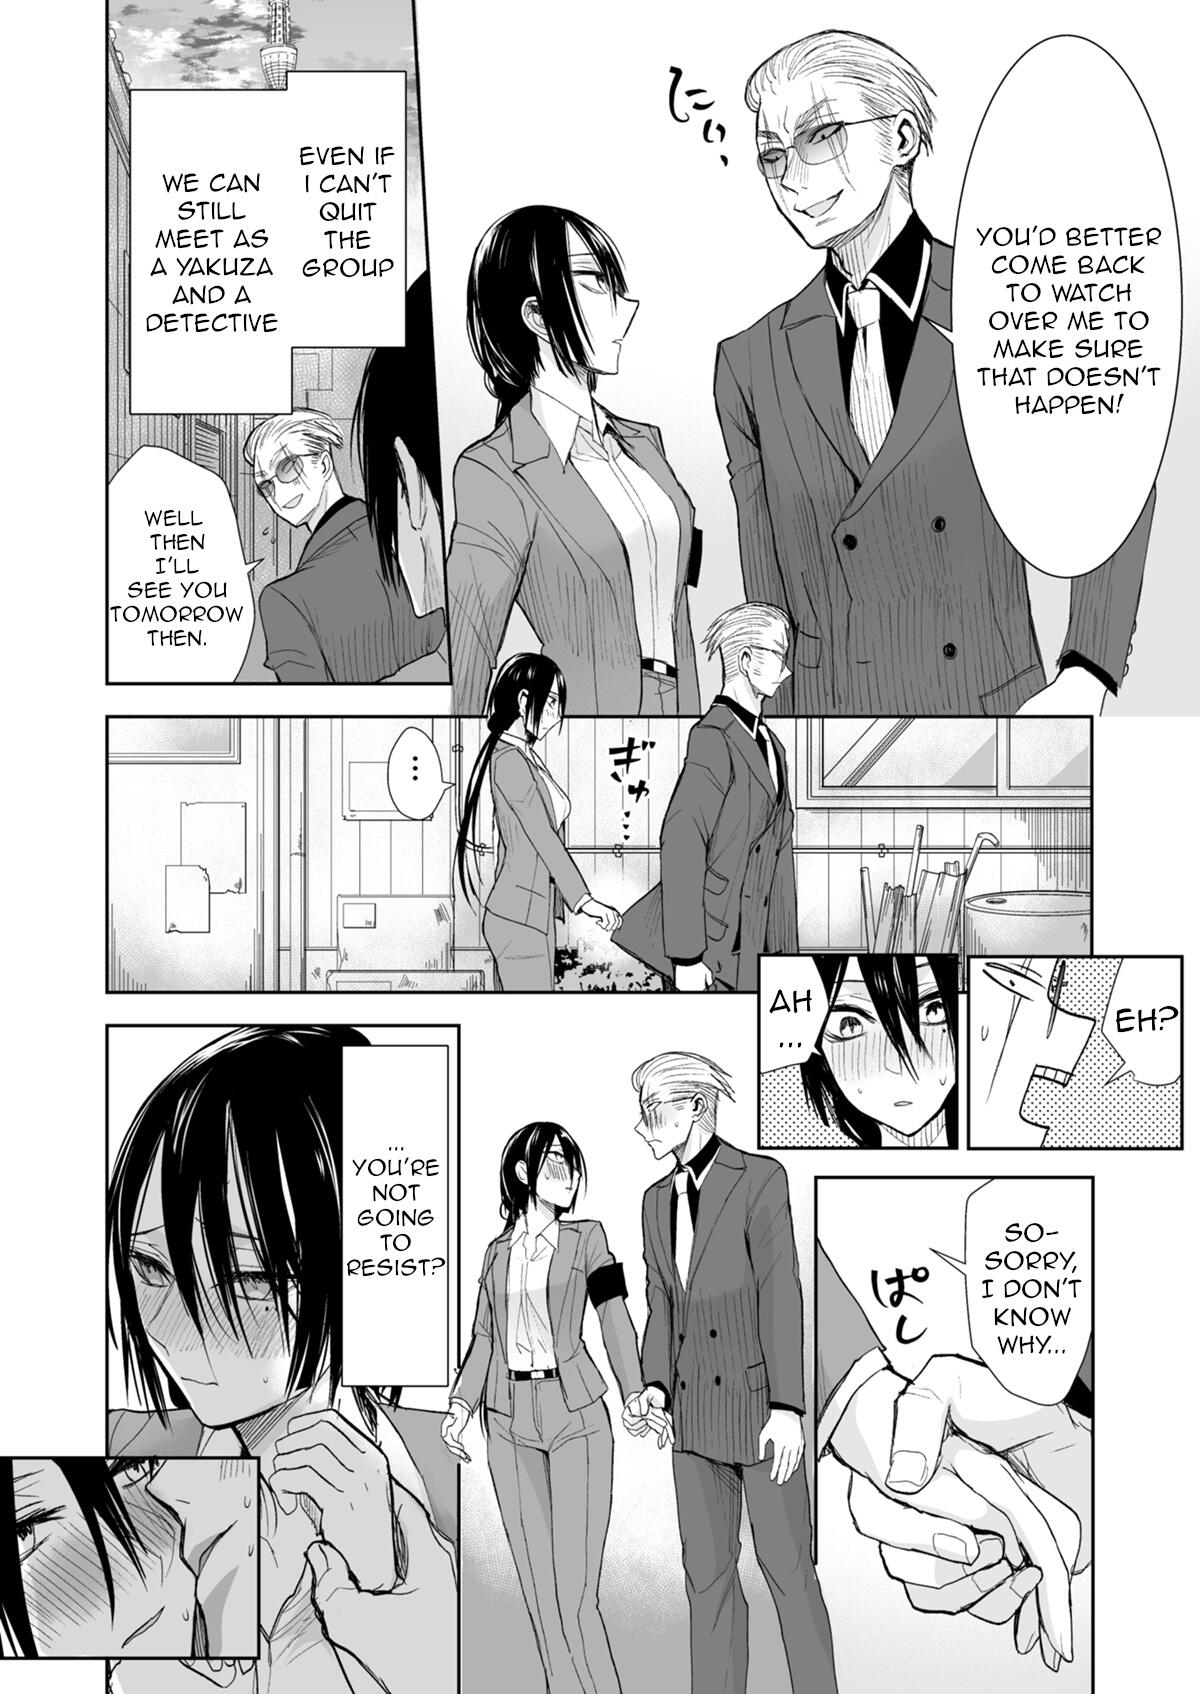 A Story About A Yakuza And A Detective With A Stern Face Chapter 24: A Story About Being Caught page 8 - Mangakakalots.com